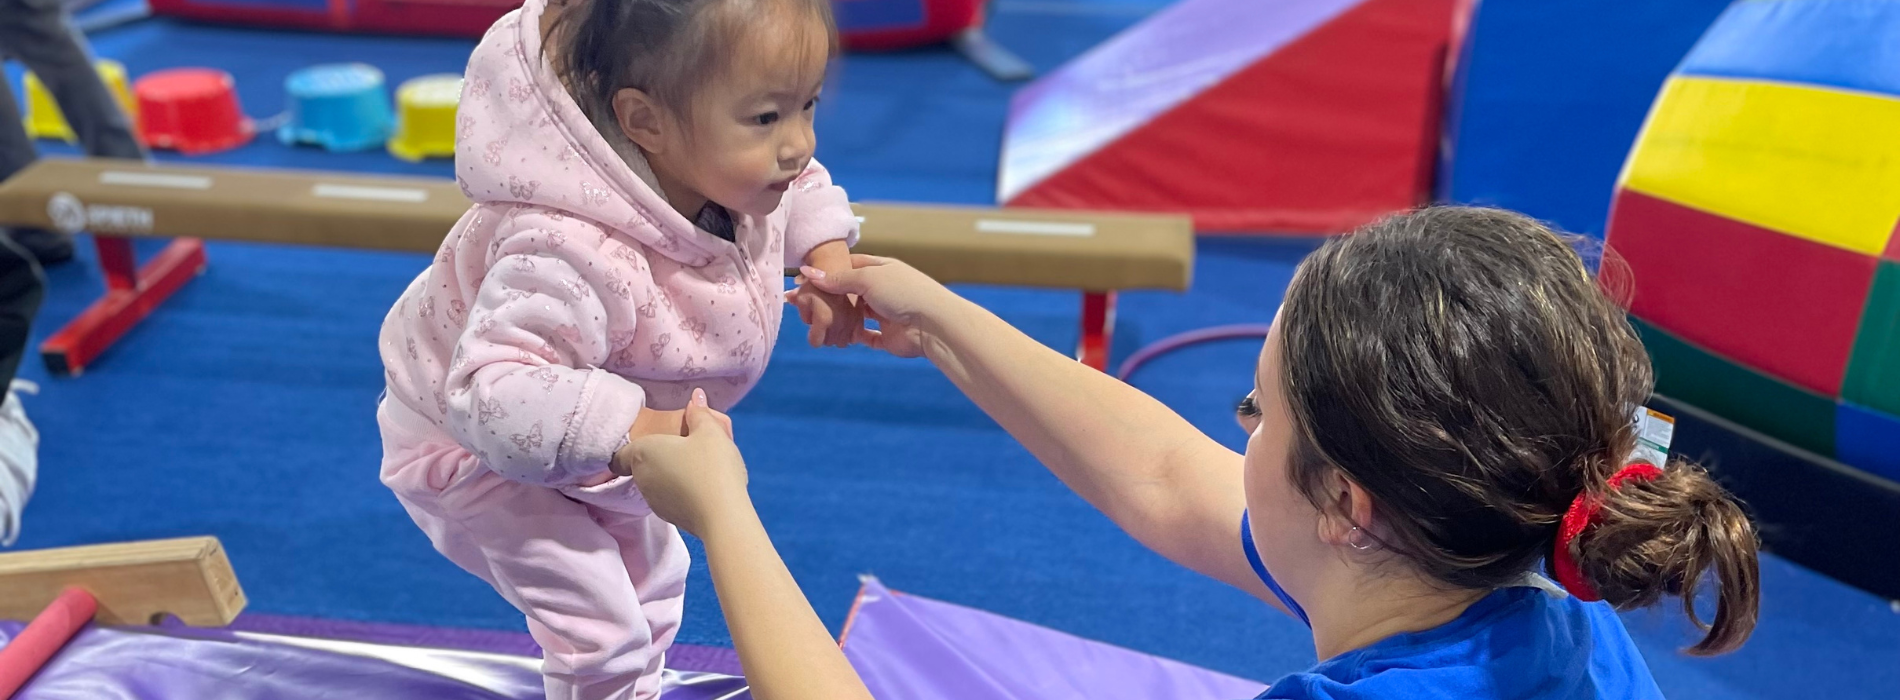 Toddler Gymnastics Classes in Upland